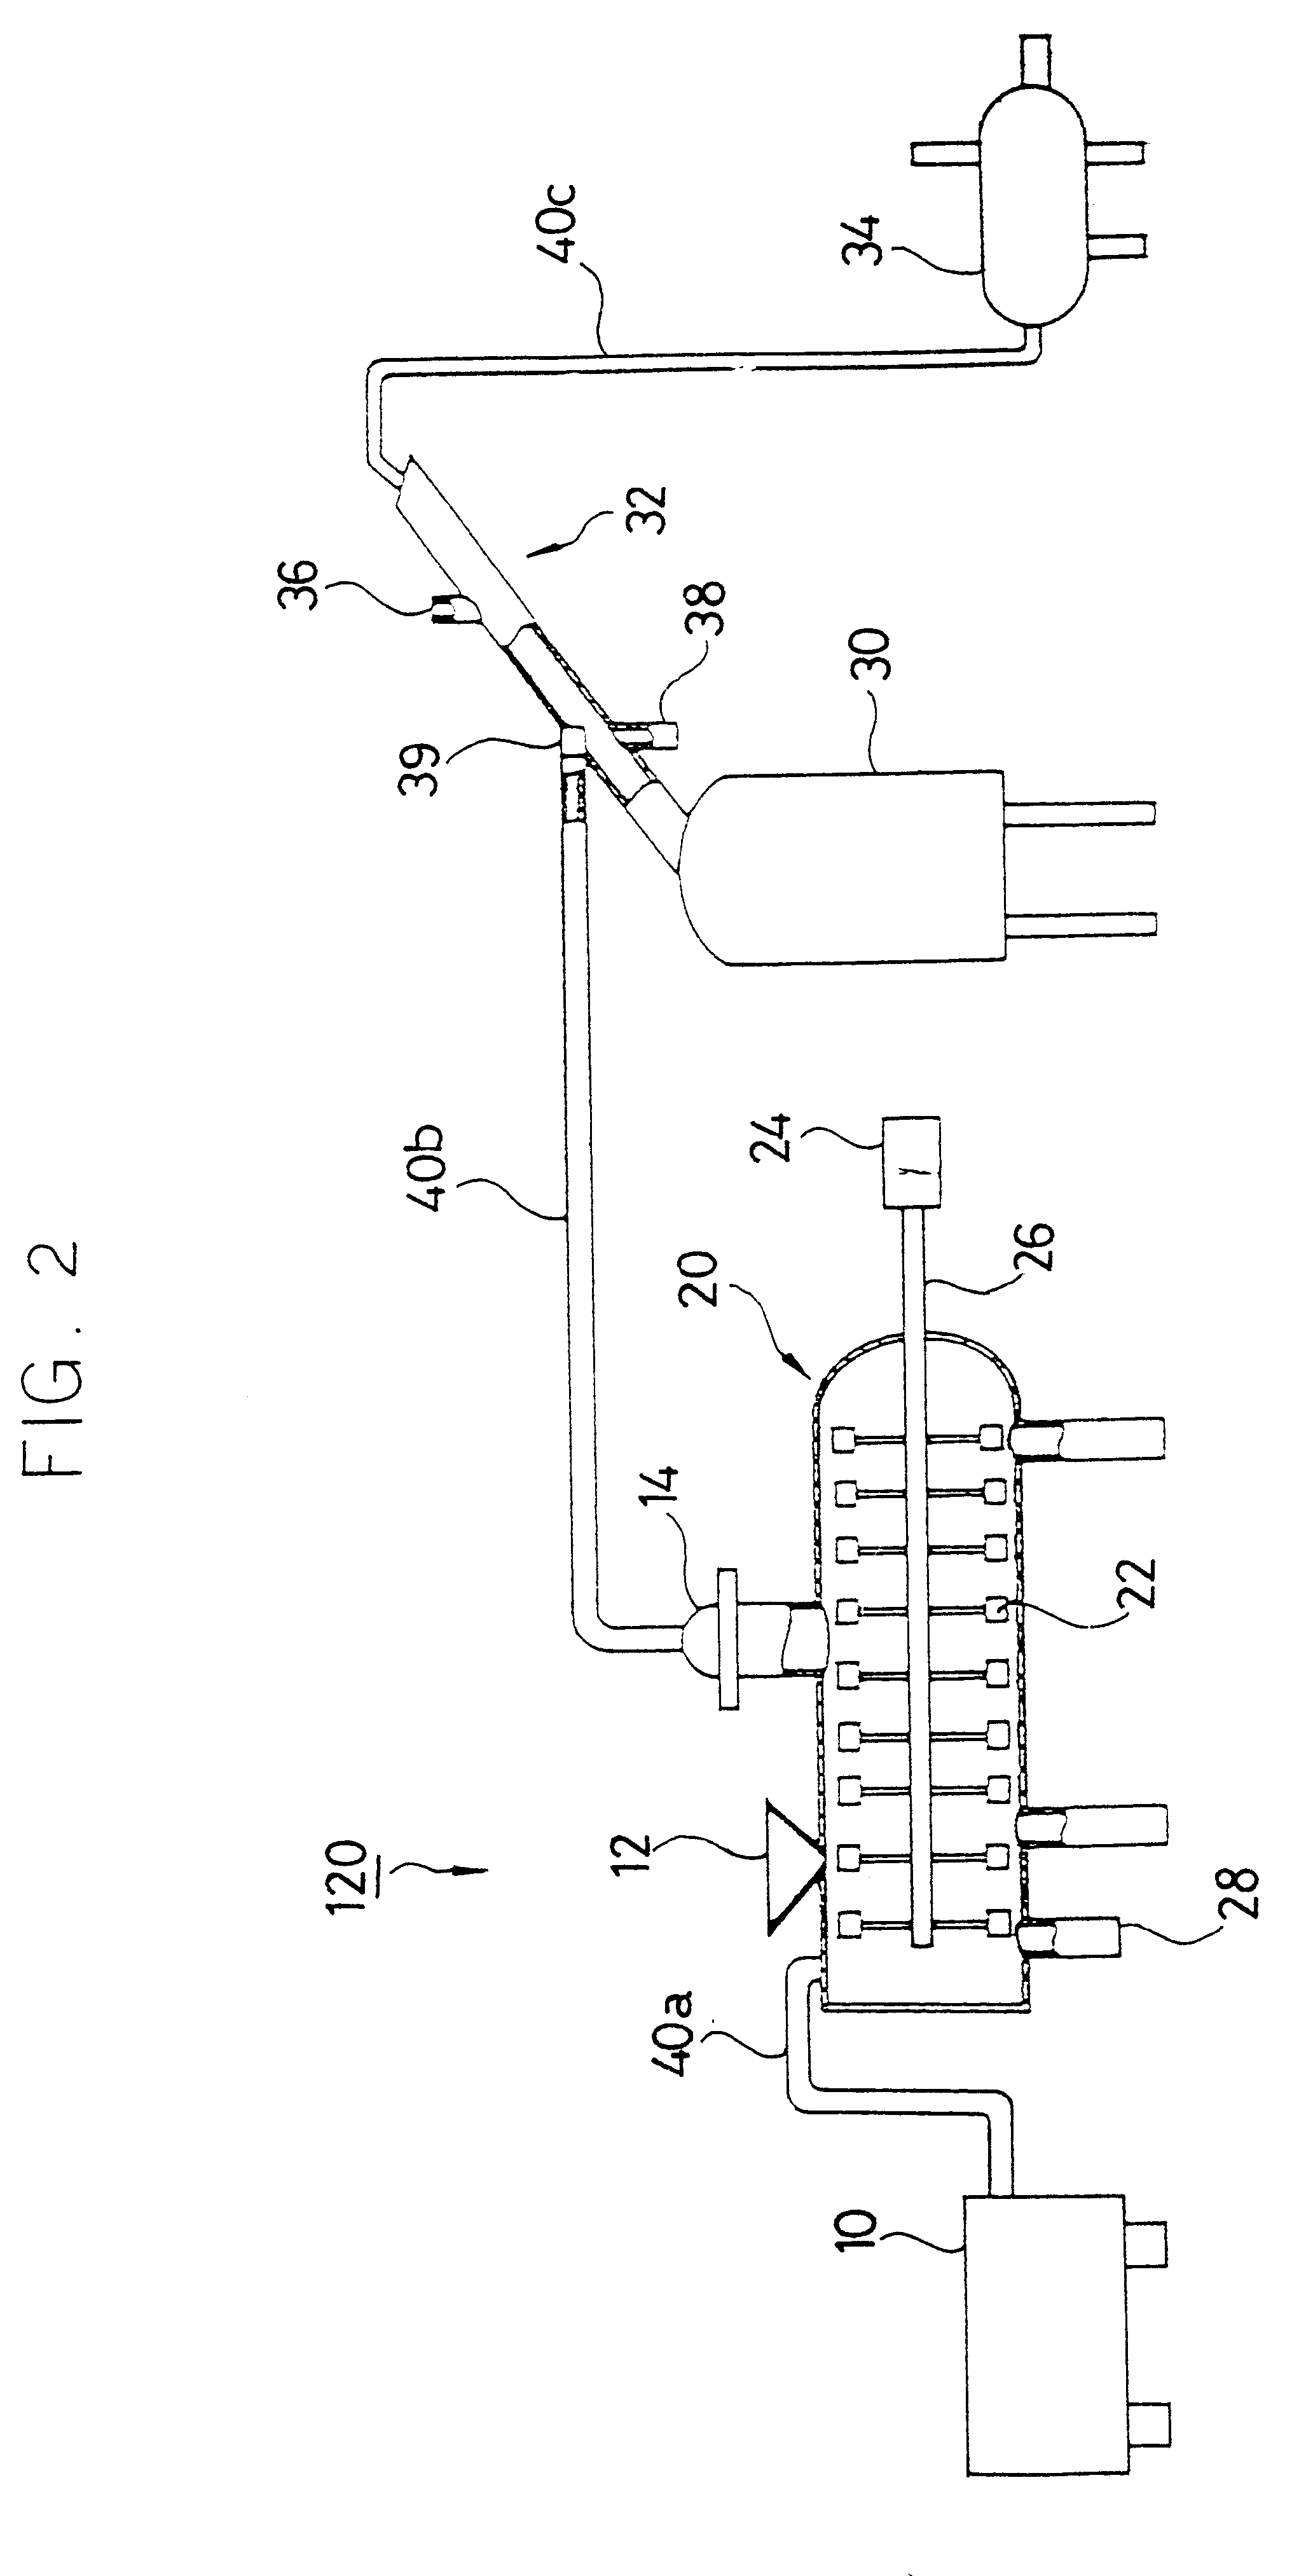 Apparatus and method for recycling waste paint